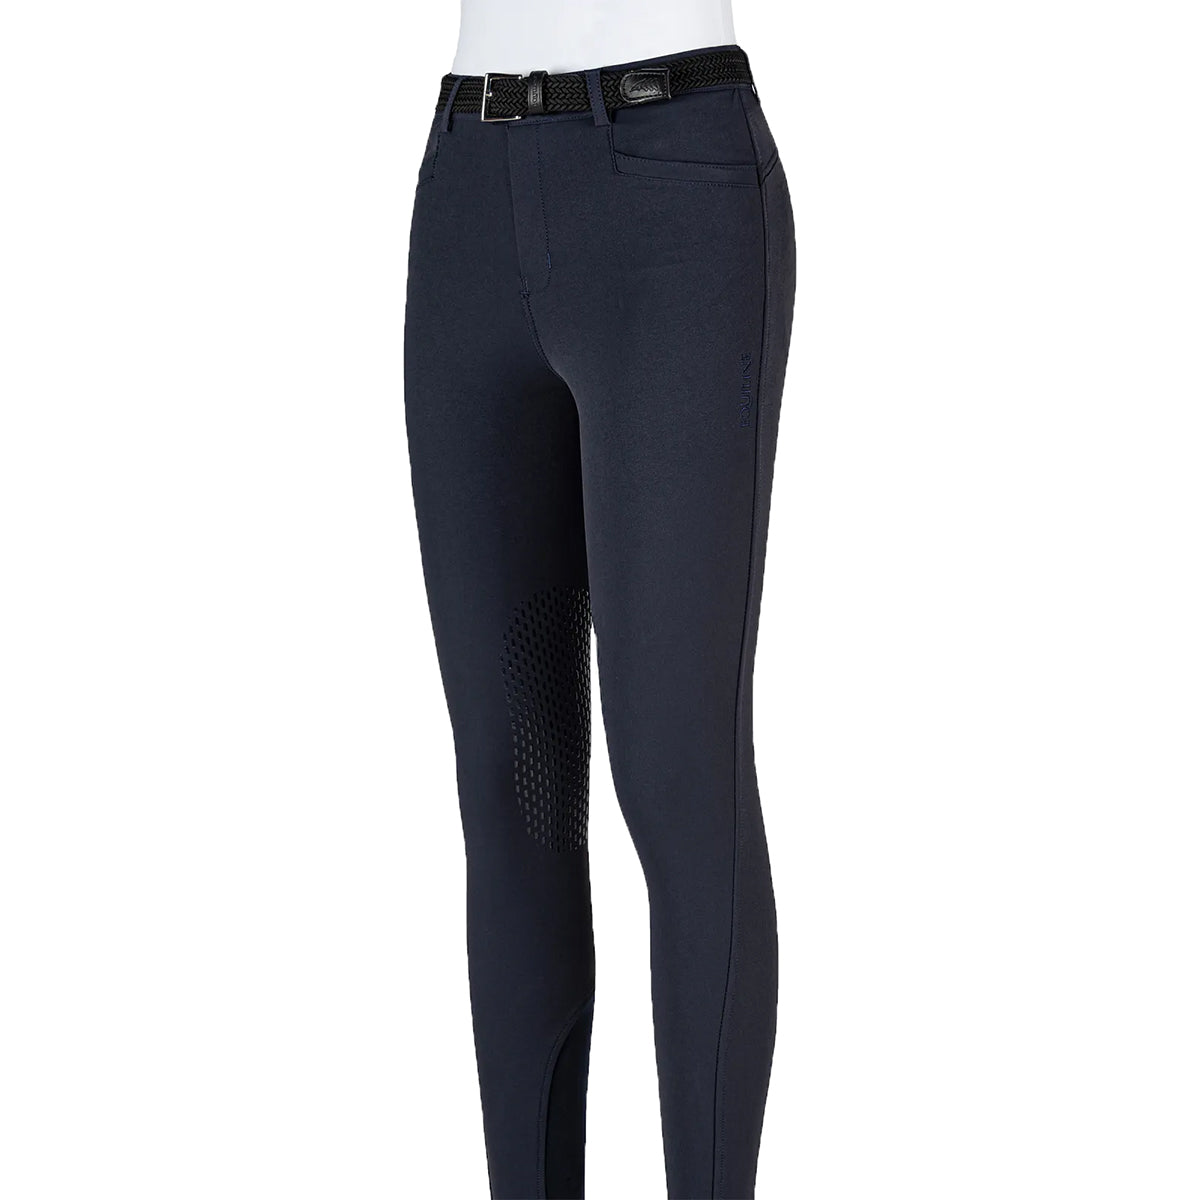 Equiline Girl's JinaK Knee Patch Breeches